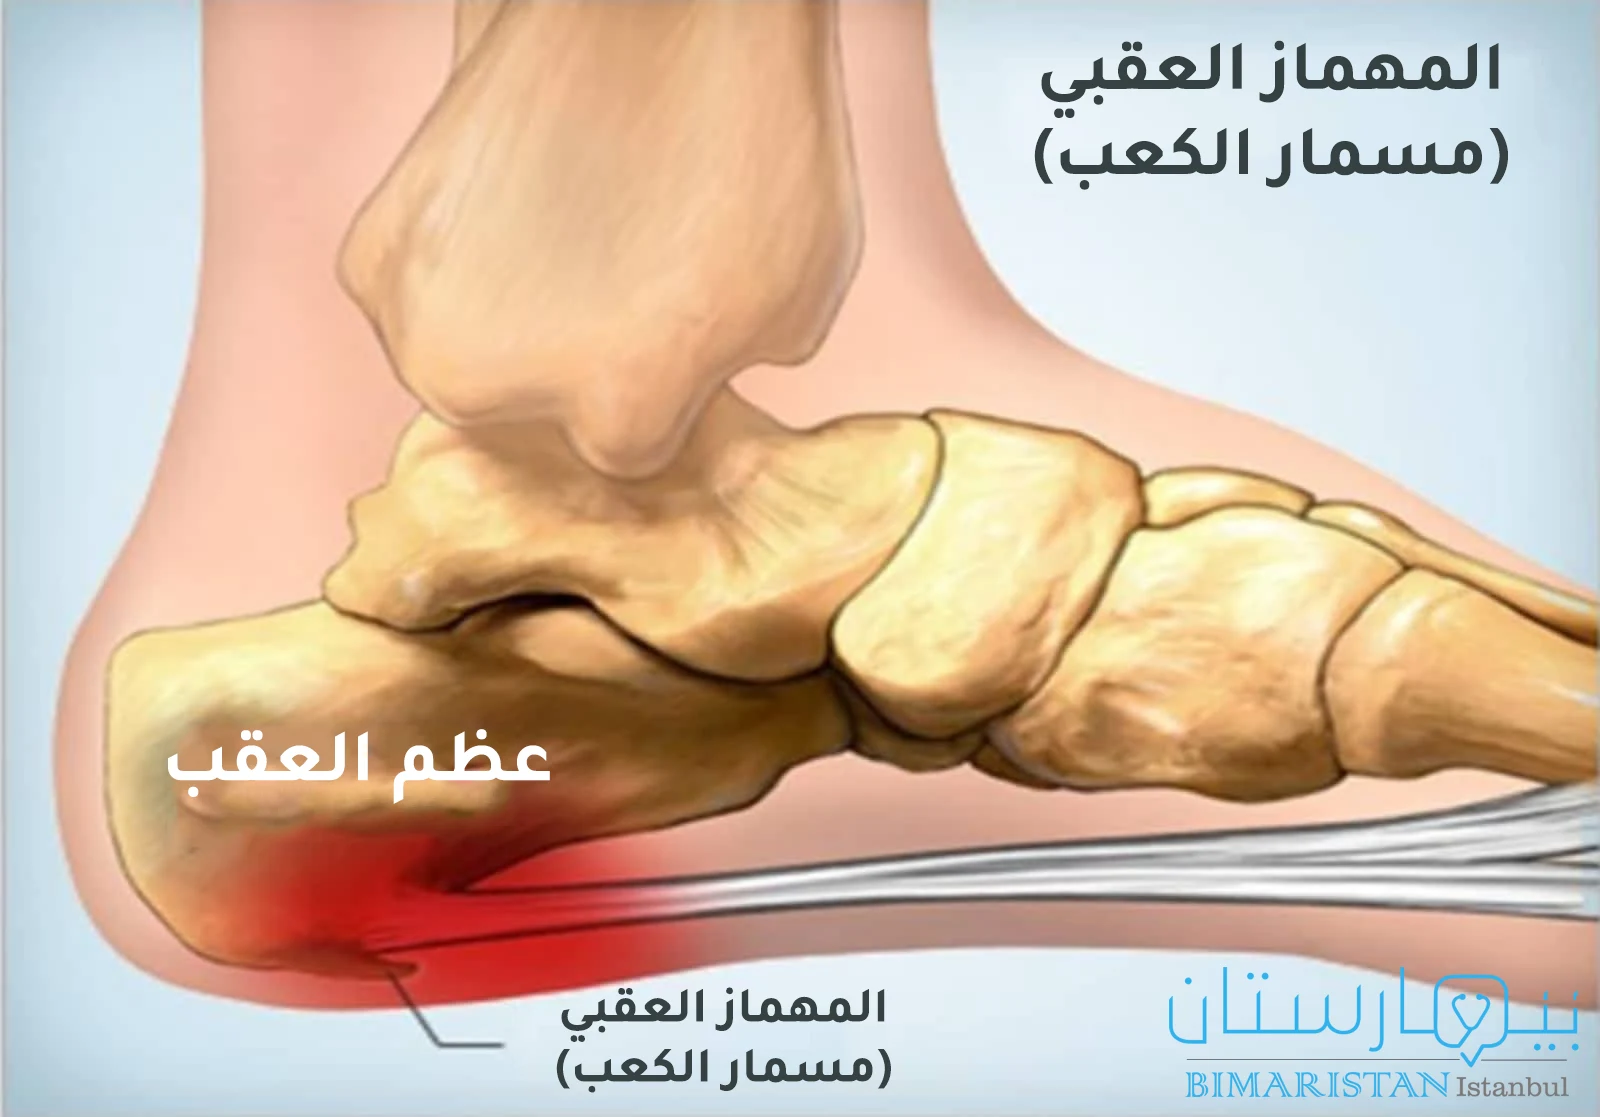 Image showing the formation of the heel nail on the heel bone and its irritation to the adjacent tissues